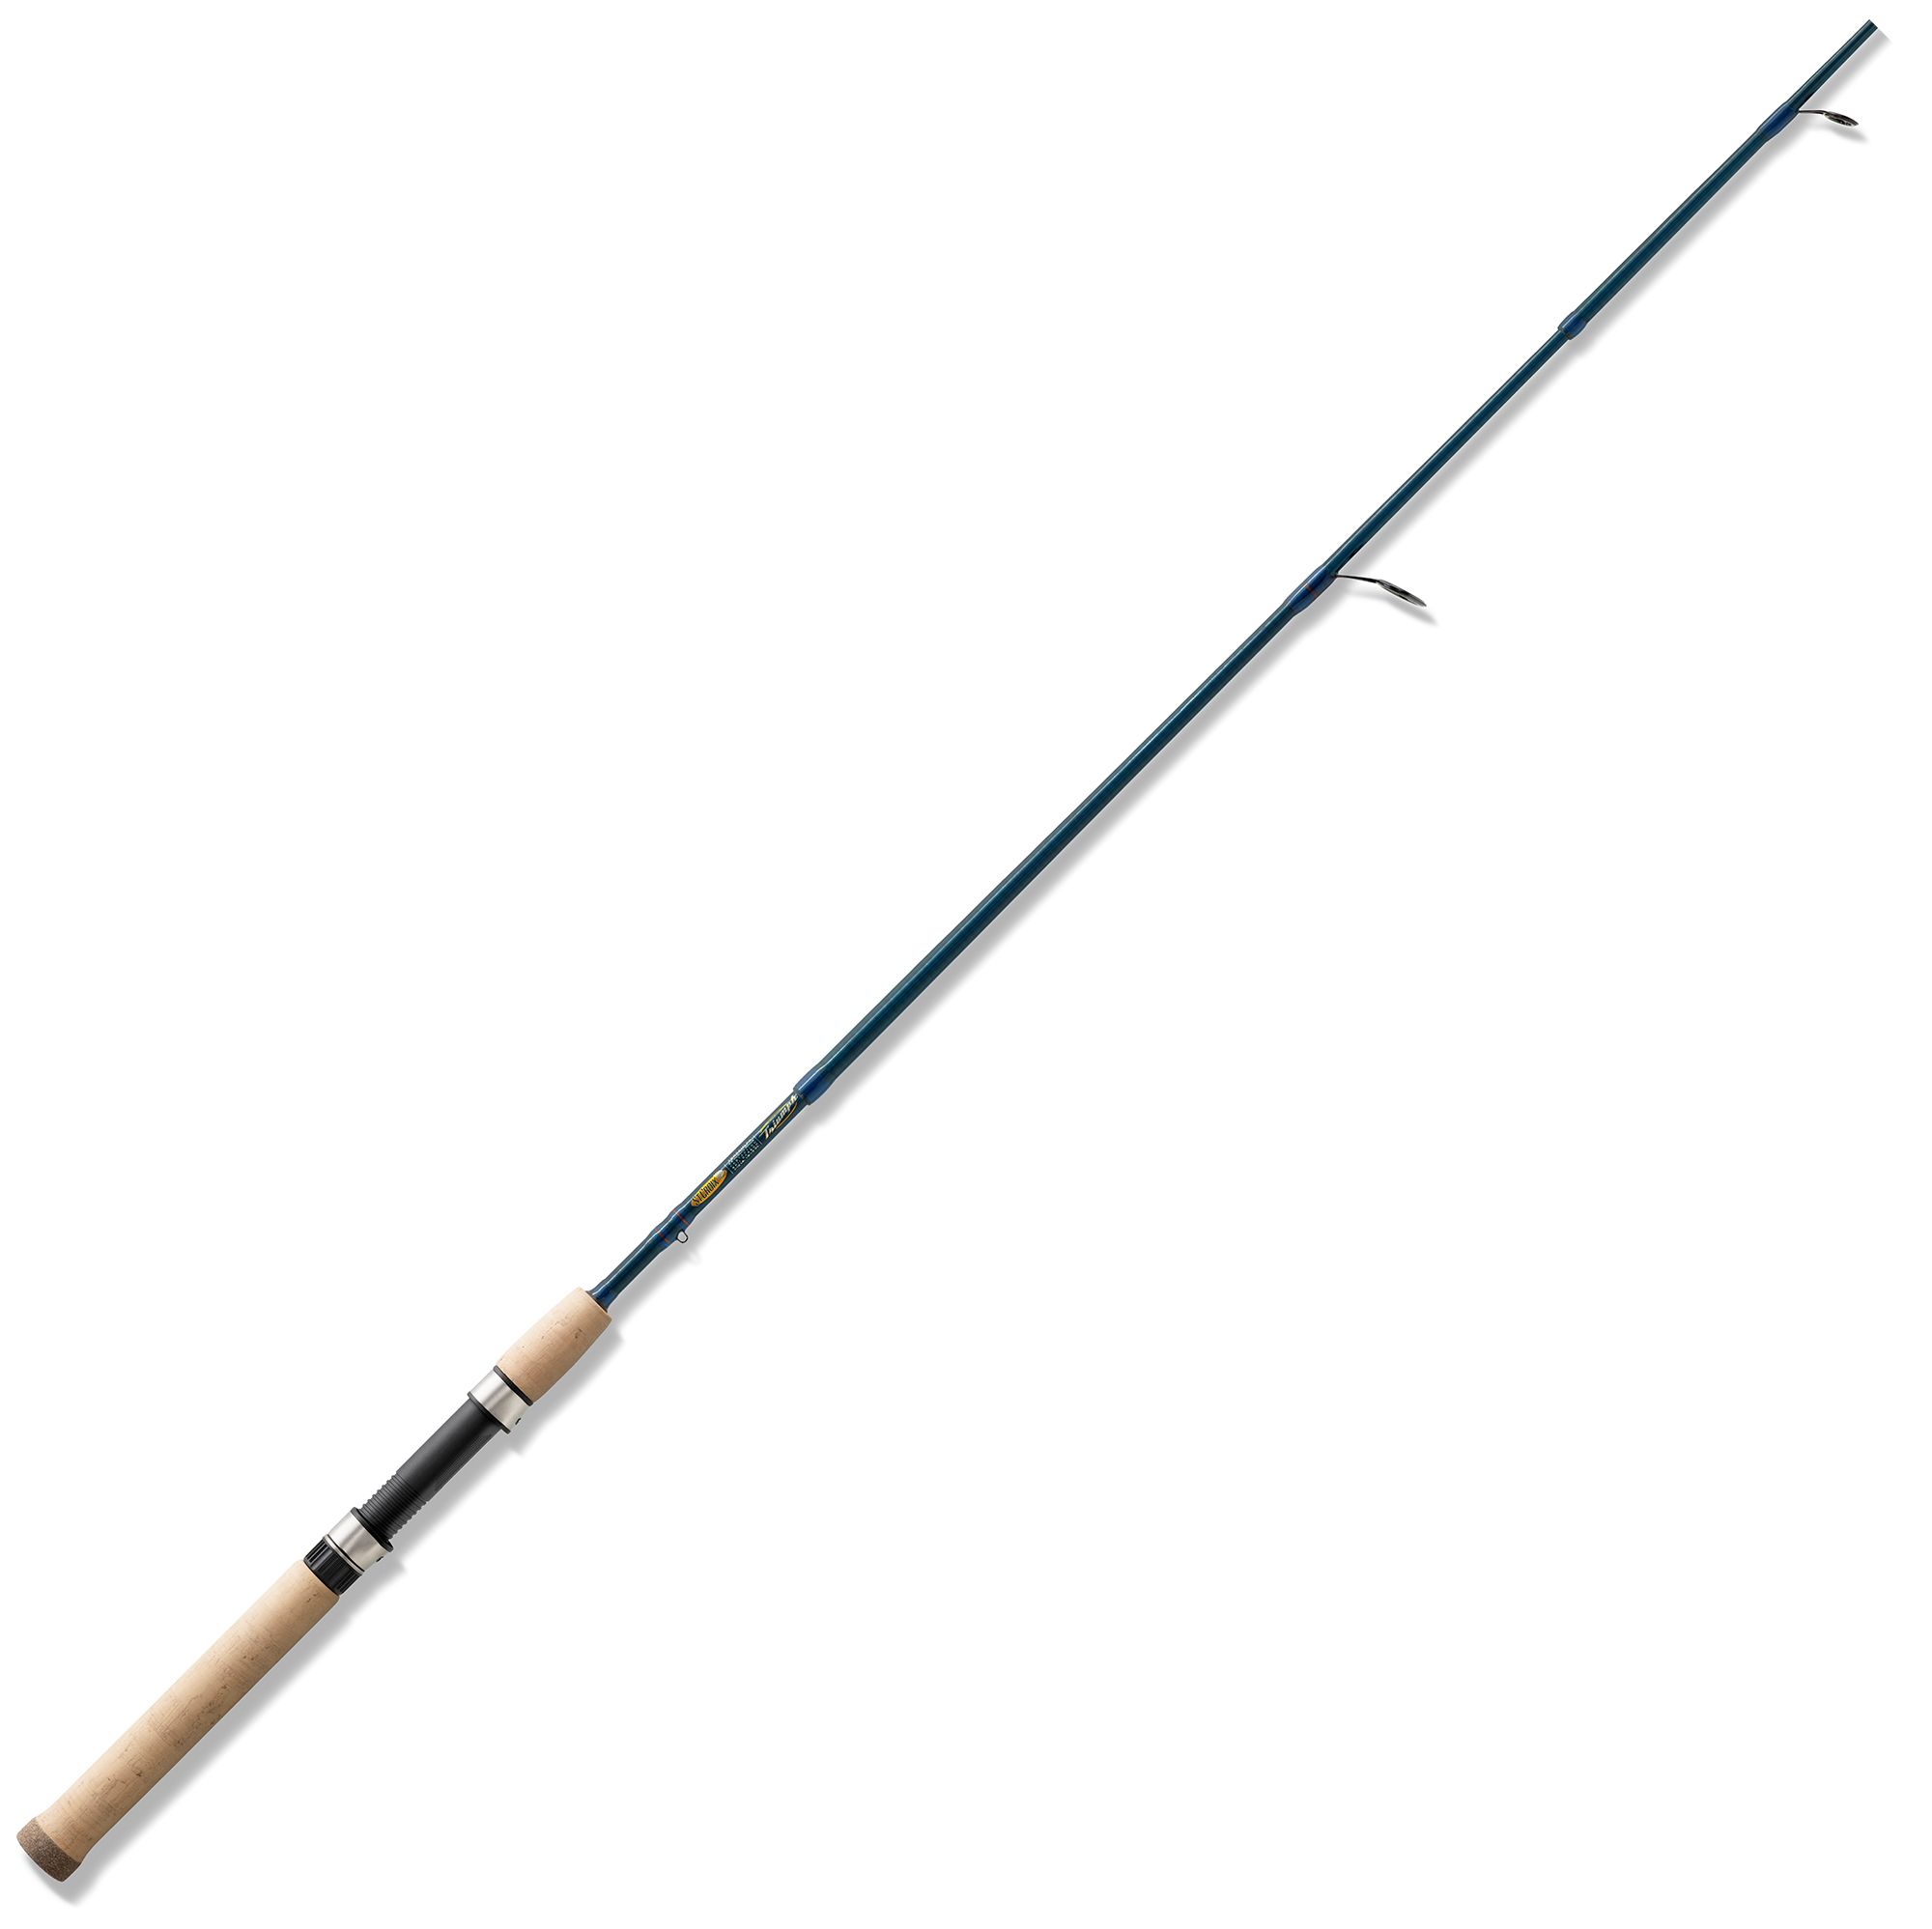 Photos - Other for Fishing St. Croix Triumph Travel Spinning Rod 21SCXASPN66MDLGHTROD 